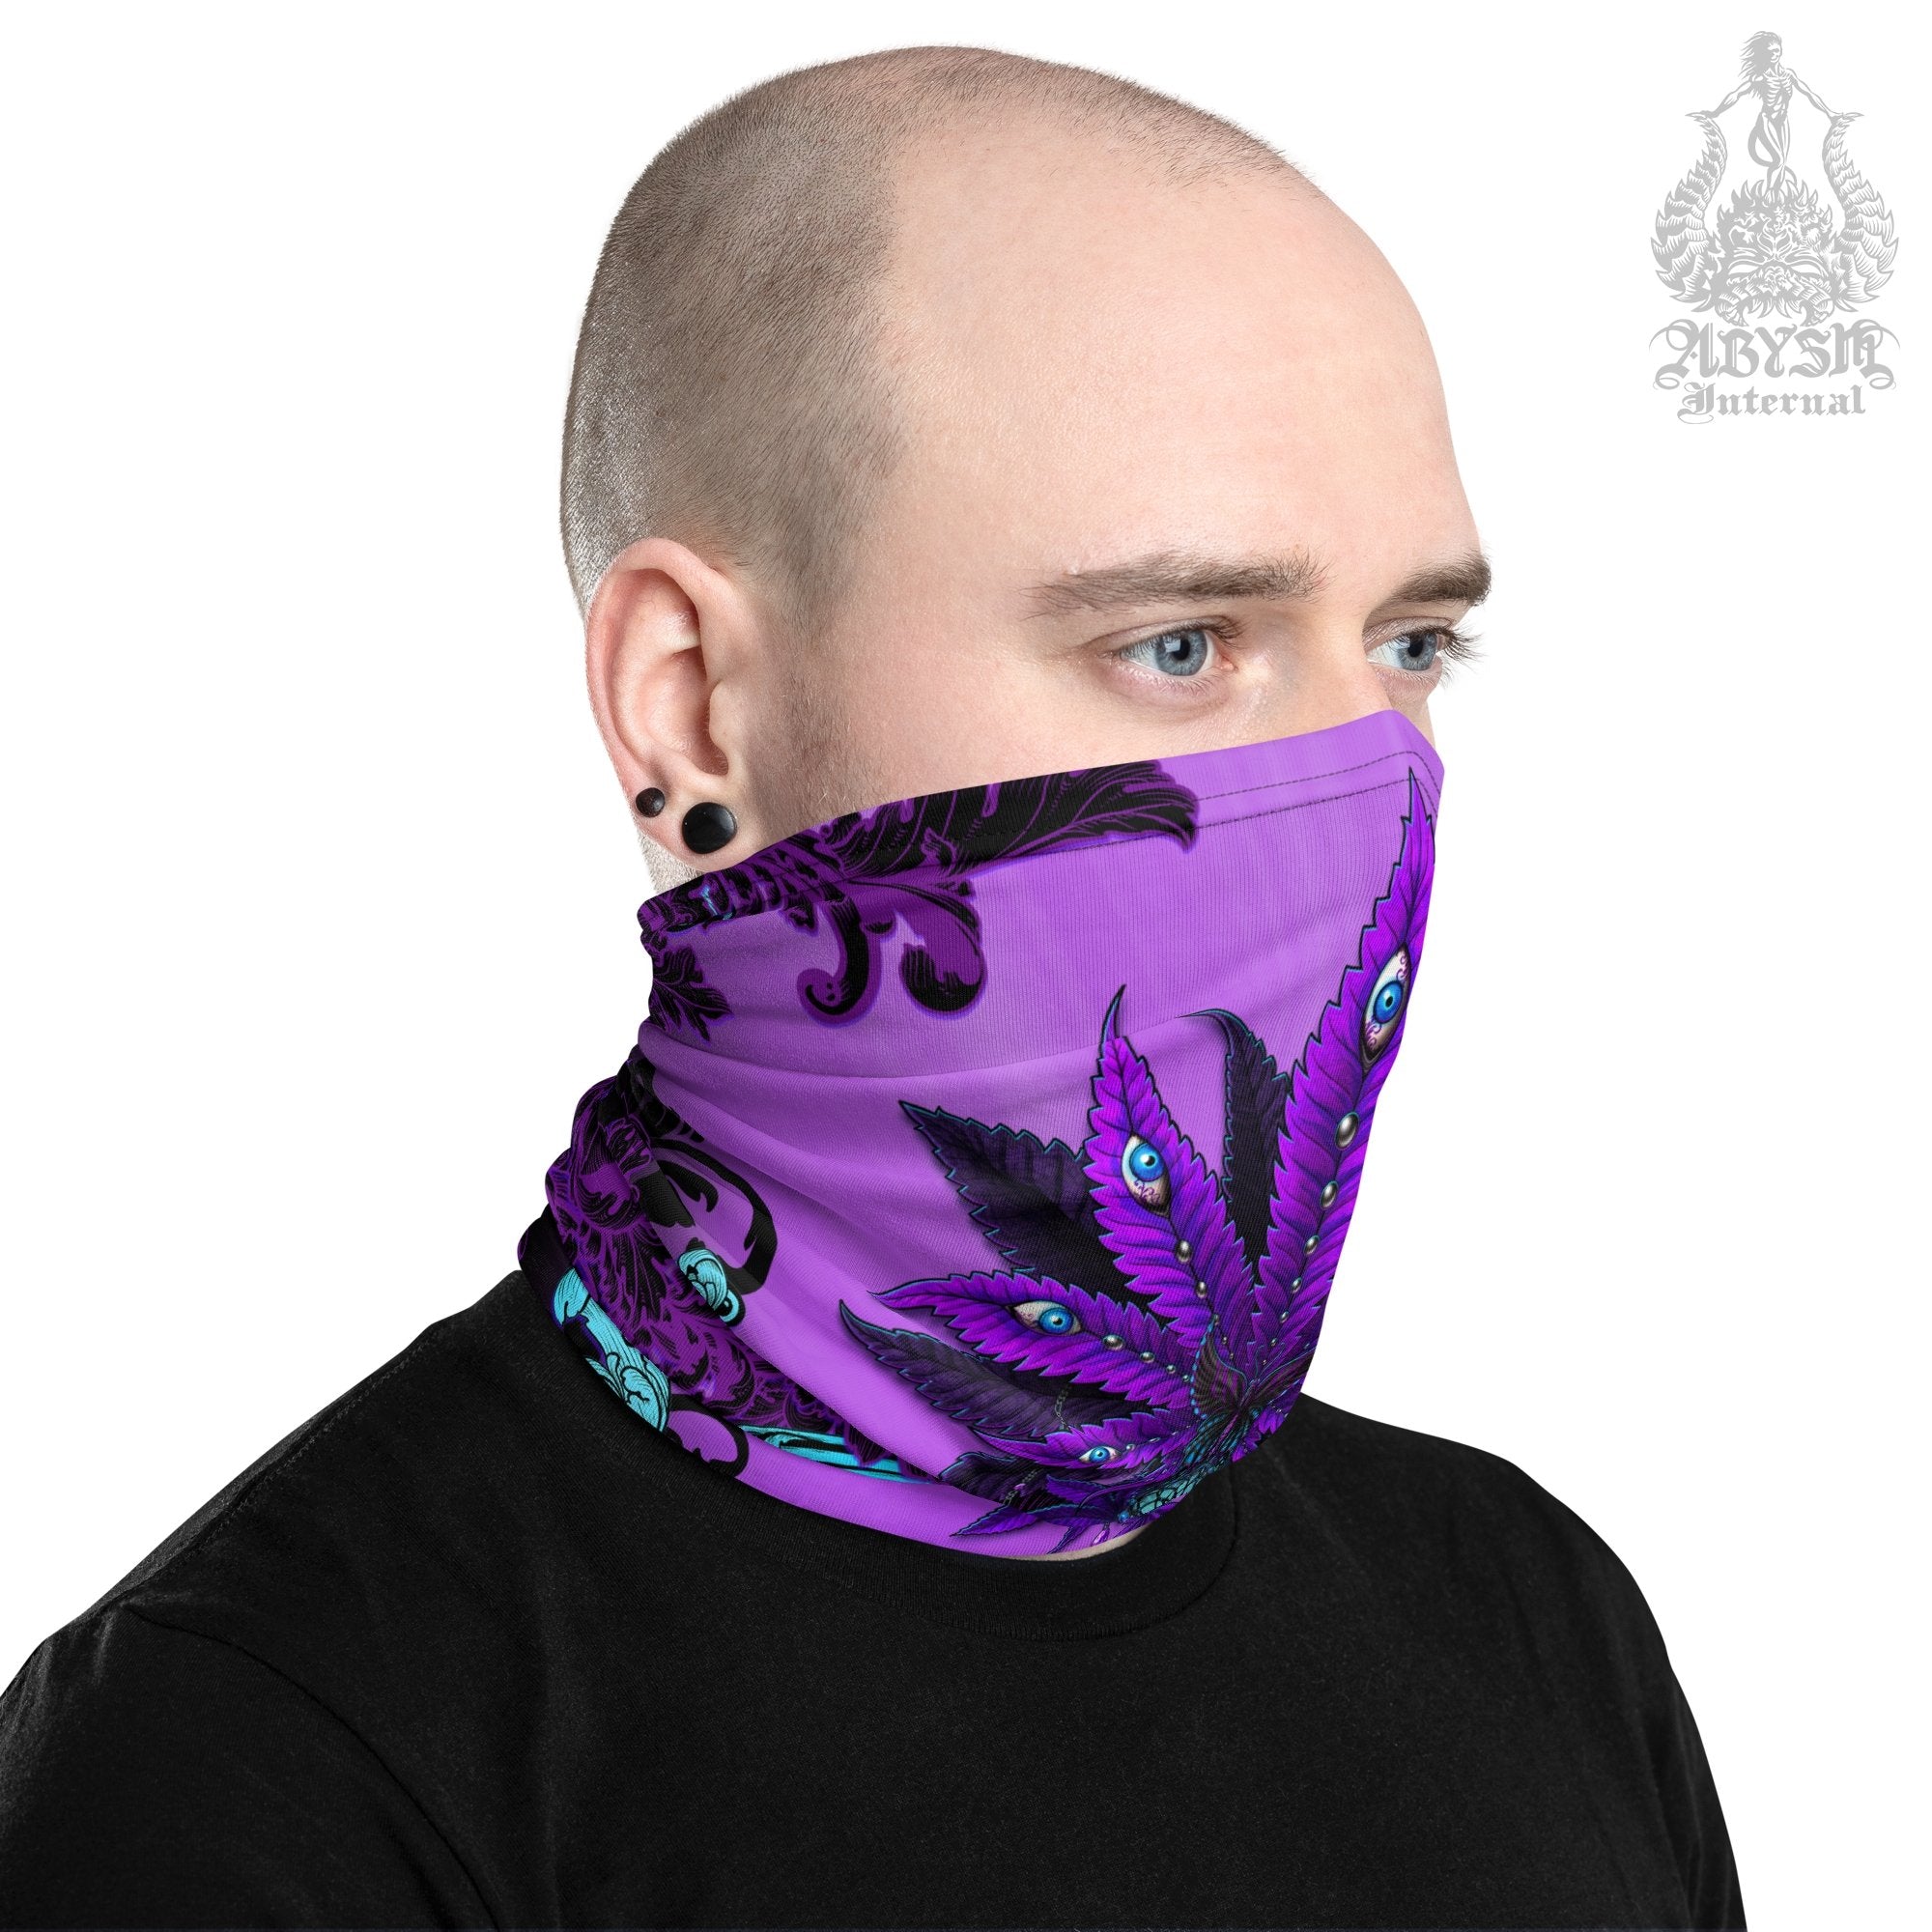 Weed Neck Gaiter, Cannabis Face Mask, Pastel Goth Marijuana Head Covering, Outdoors Festival Outfit, Heavy Metal Concert, 420 Gift - Purple Black - Abysm Internal